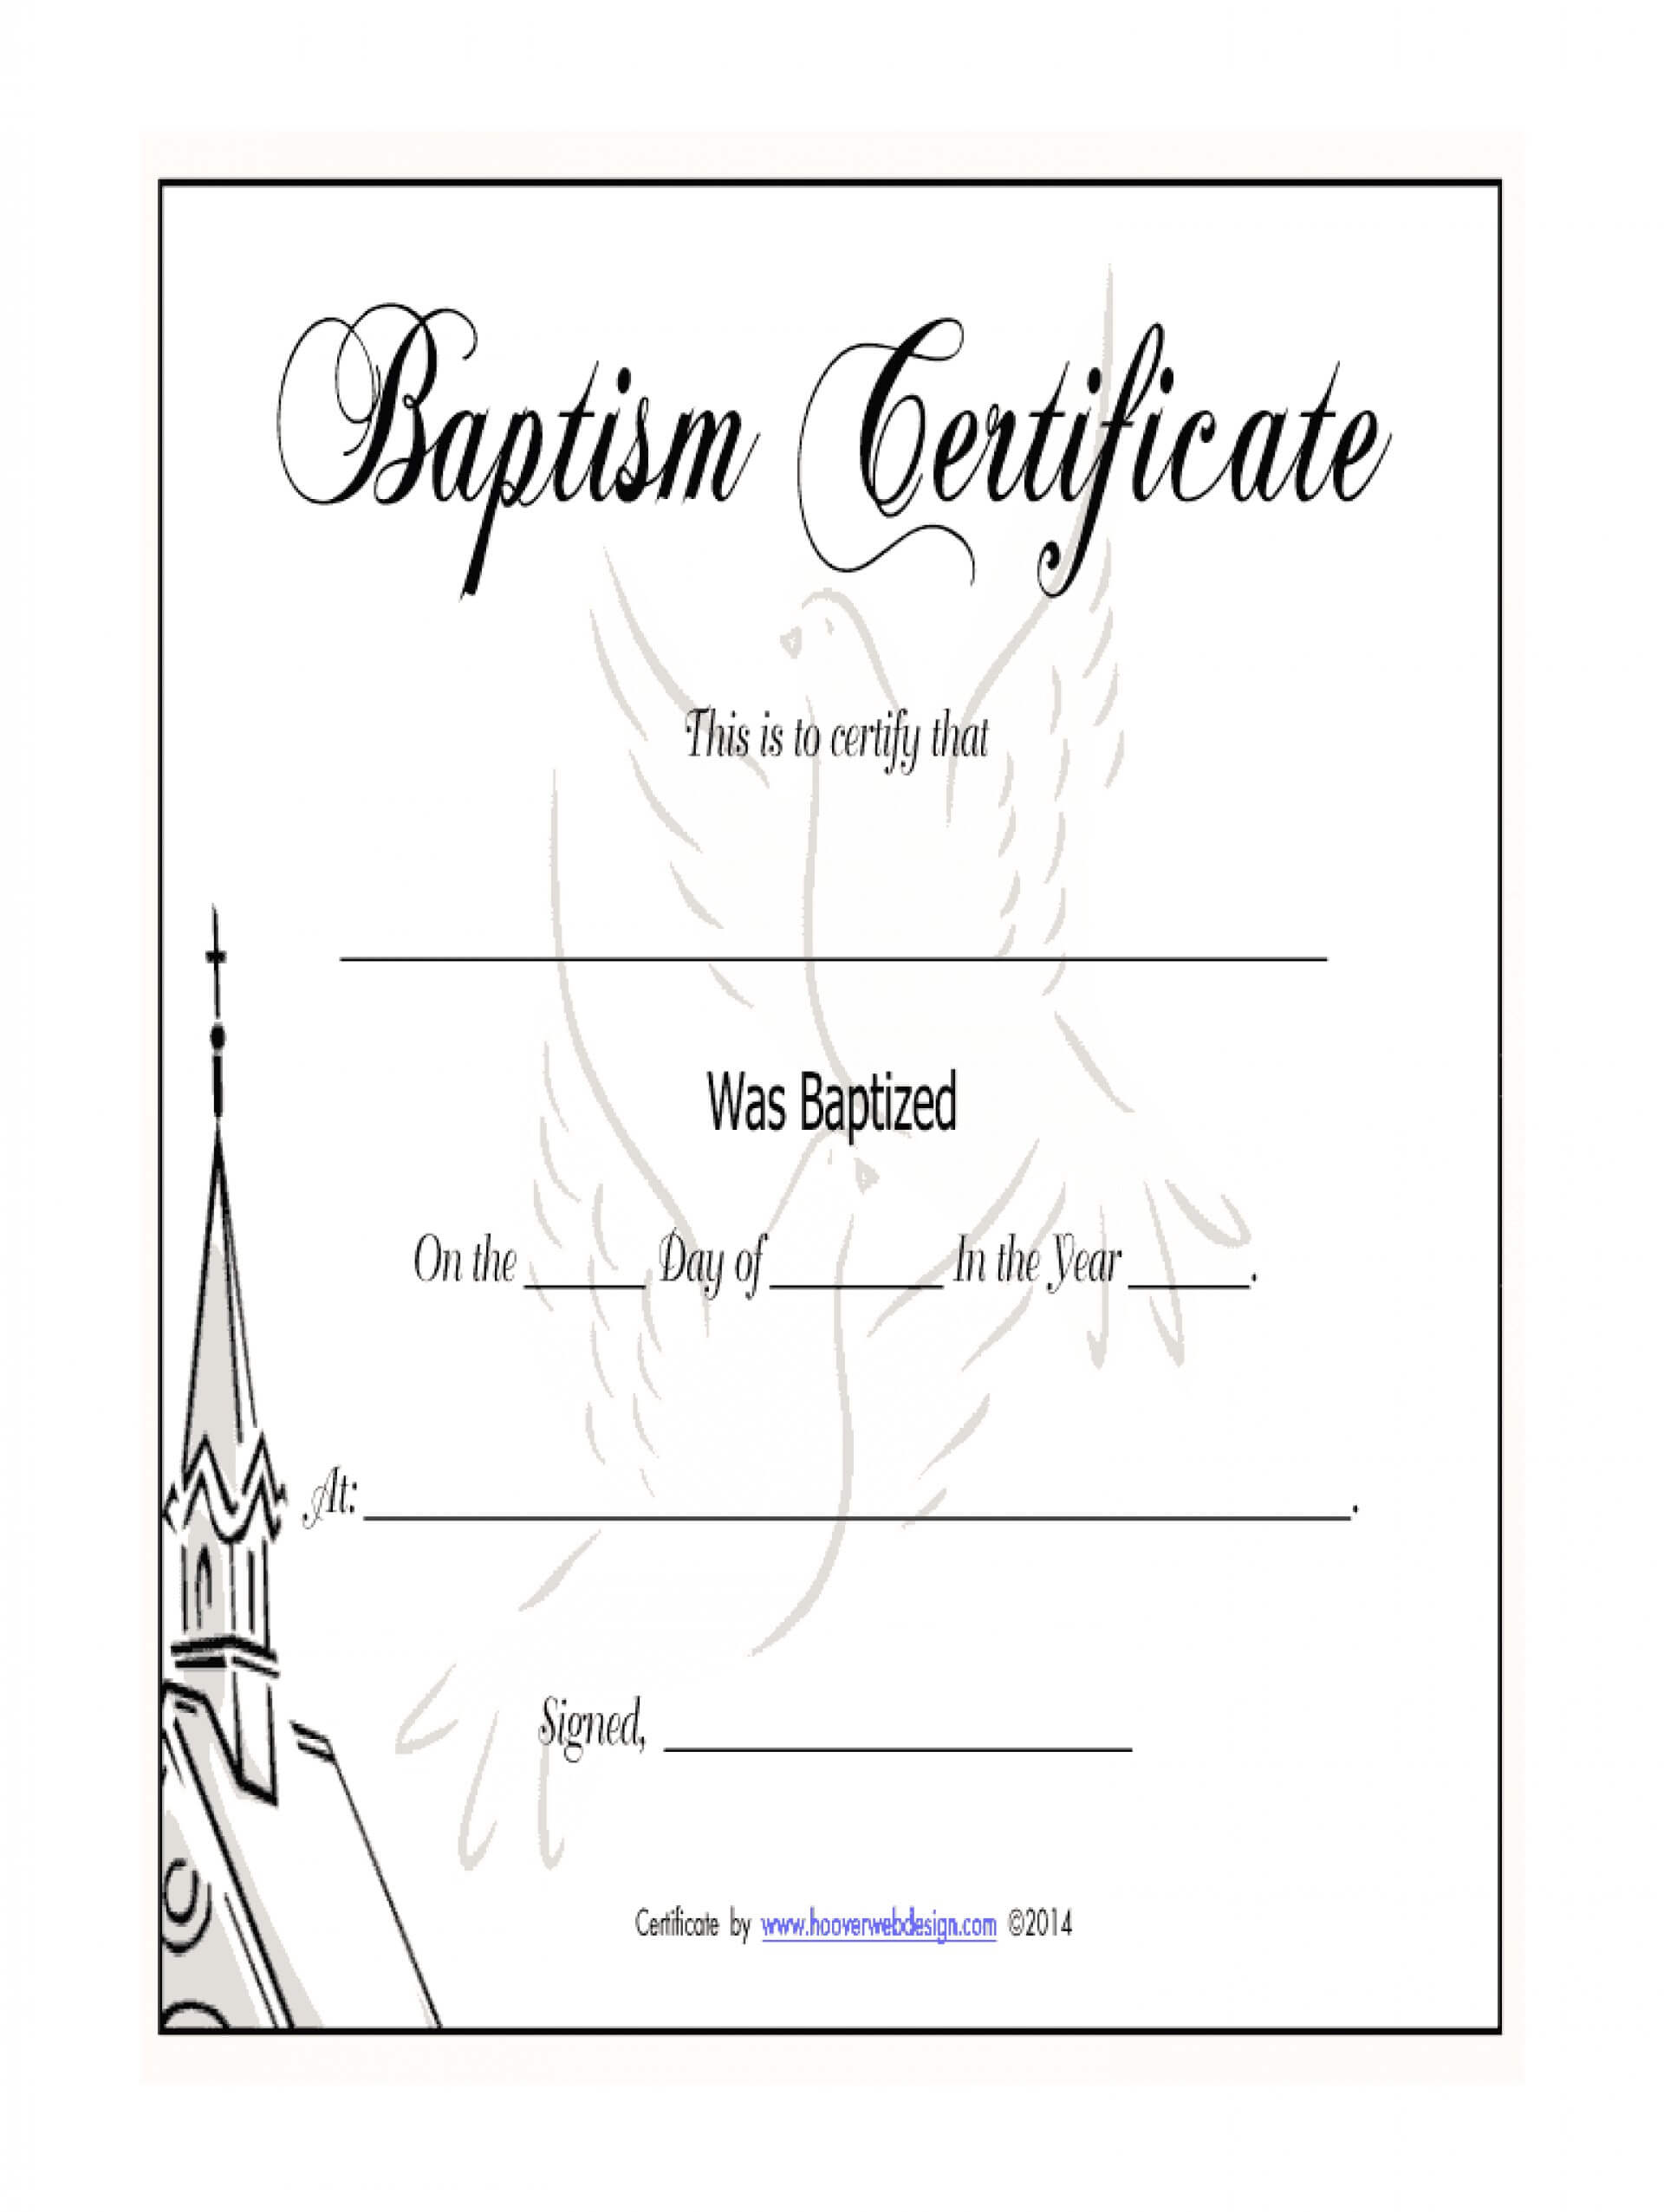 8C3E0 Certificate Of Baptism Template | Wiring Resources Within Baptism Certificate Template Word